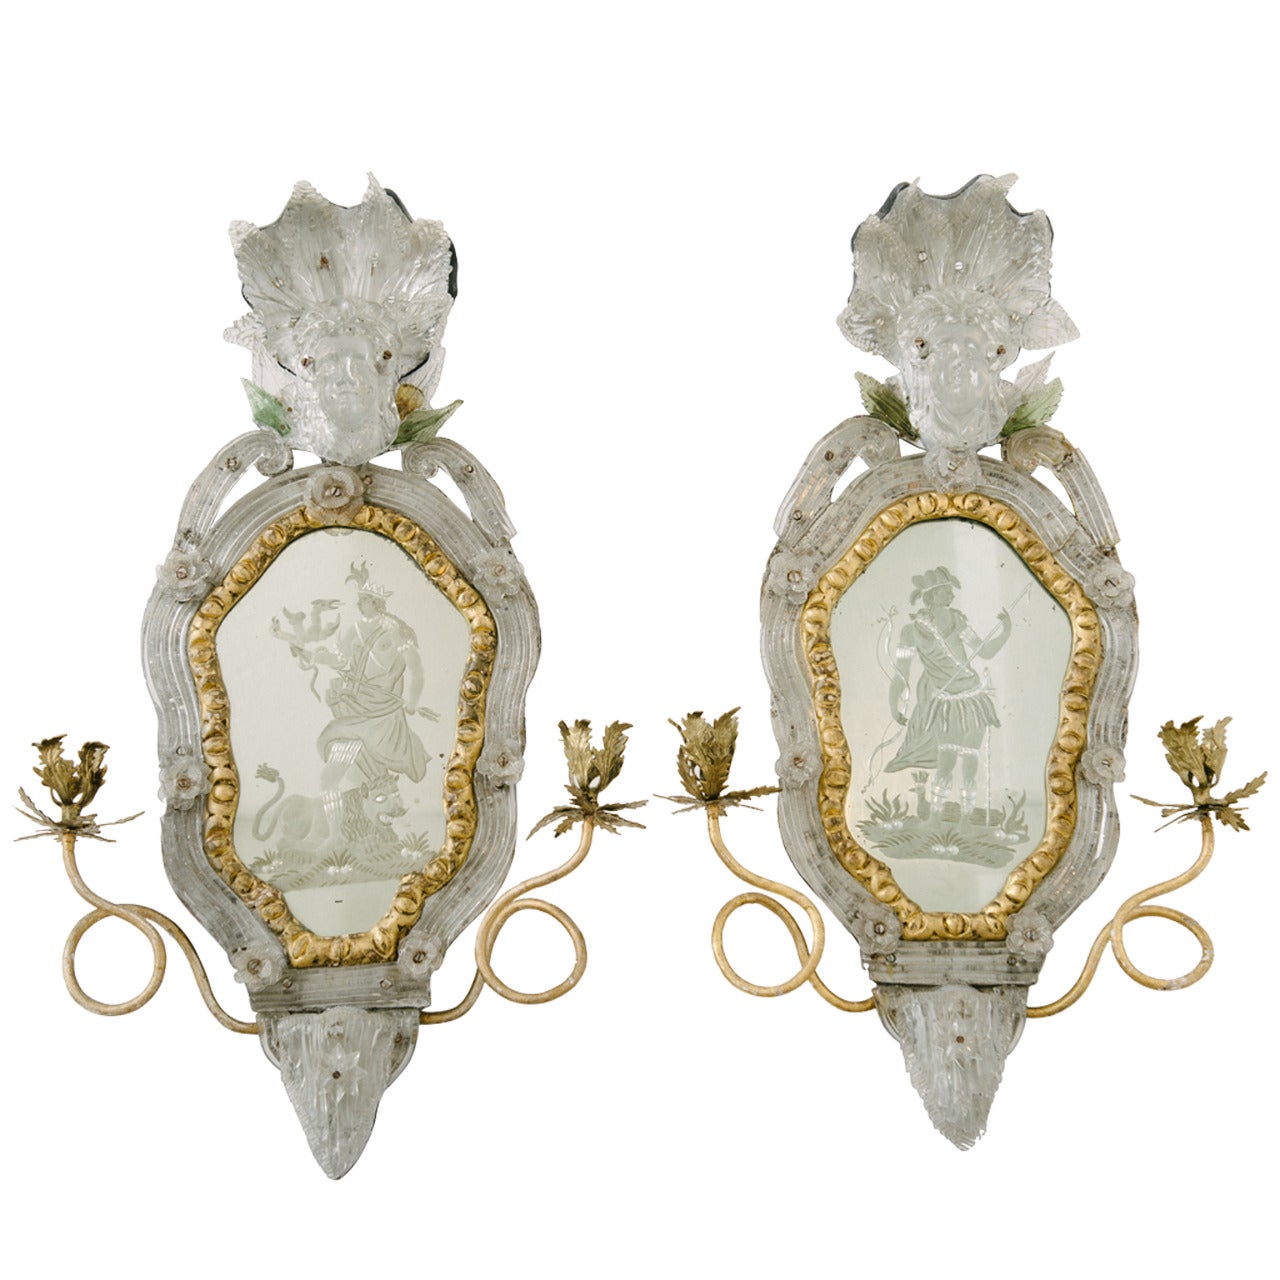 Rare Pair of 18th Century Venetian Etched Mirror Wall Sconces